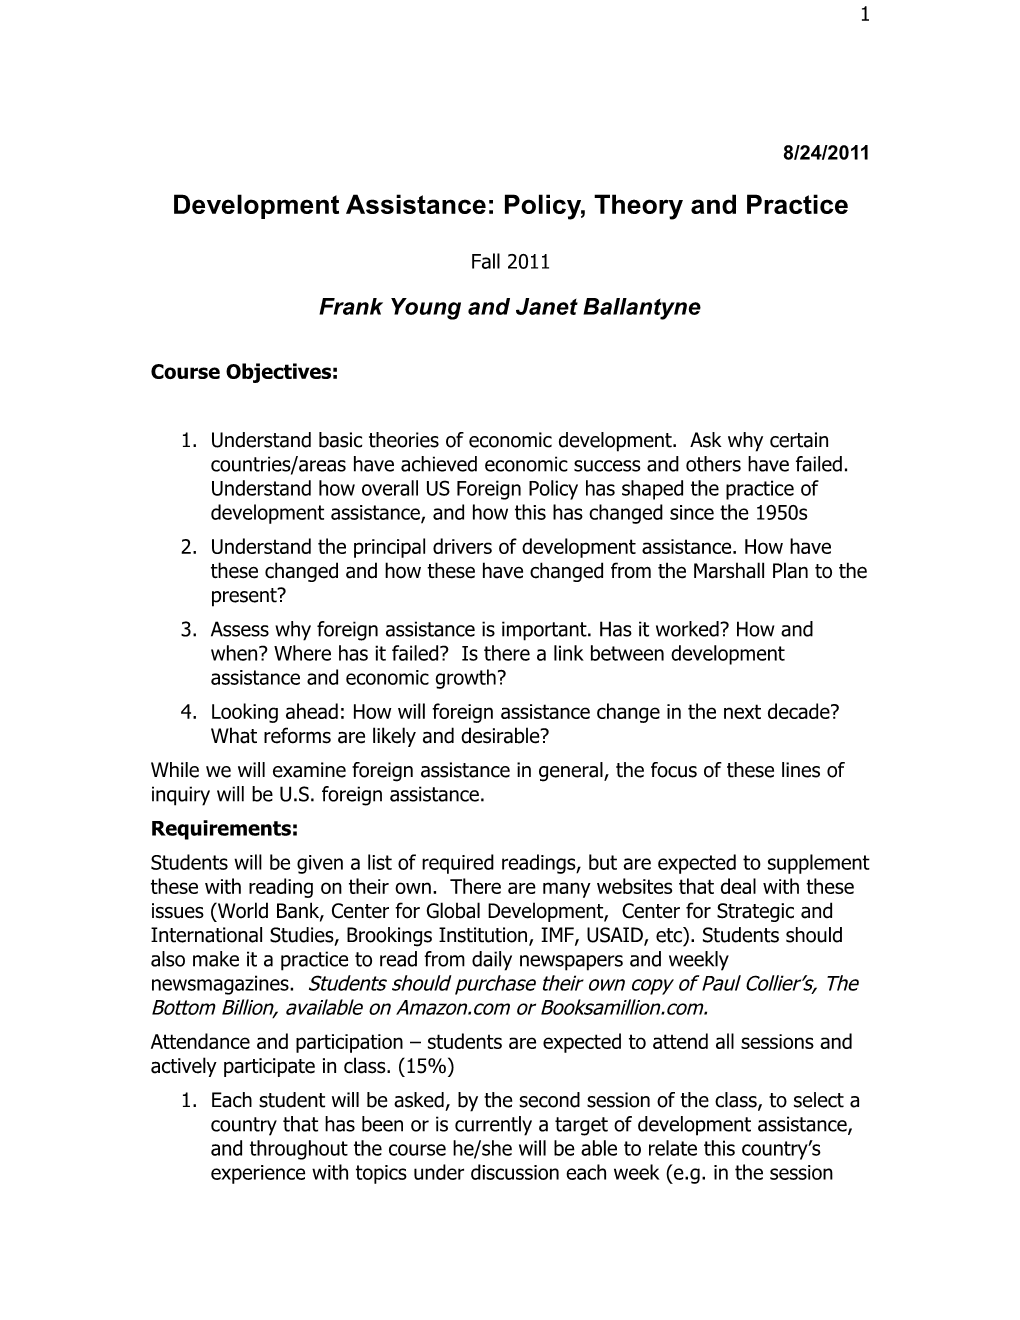 Development Assistance: Policy, Theory and Practice